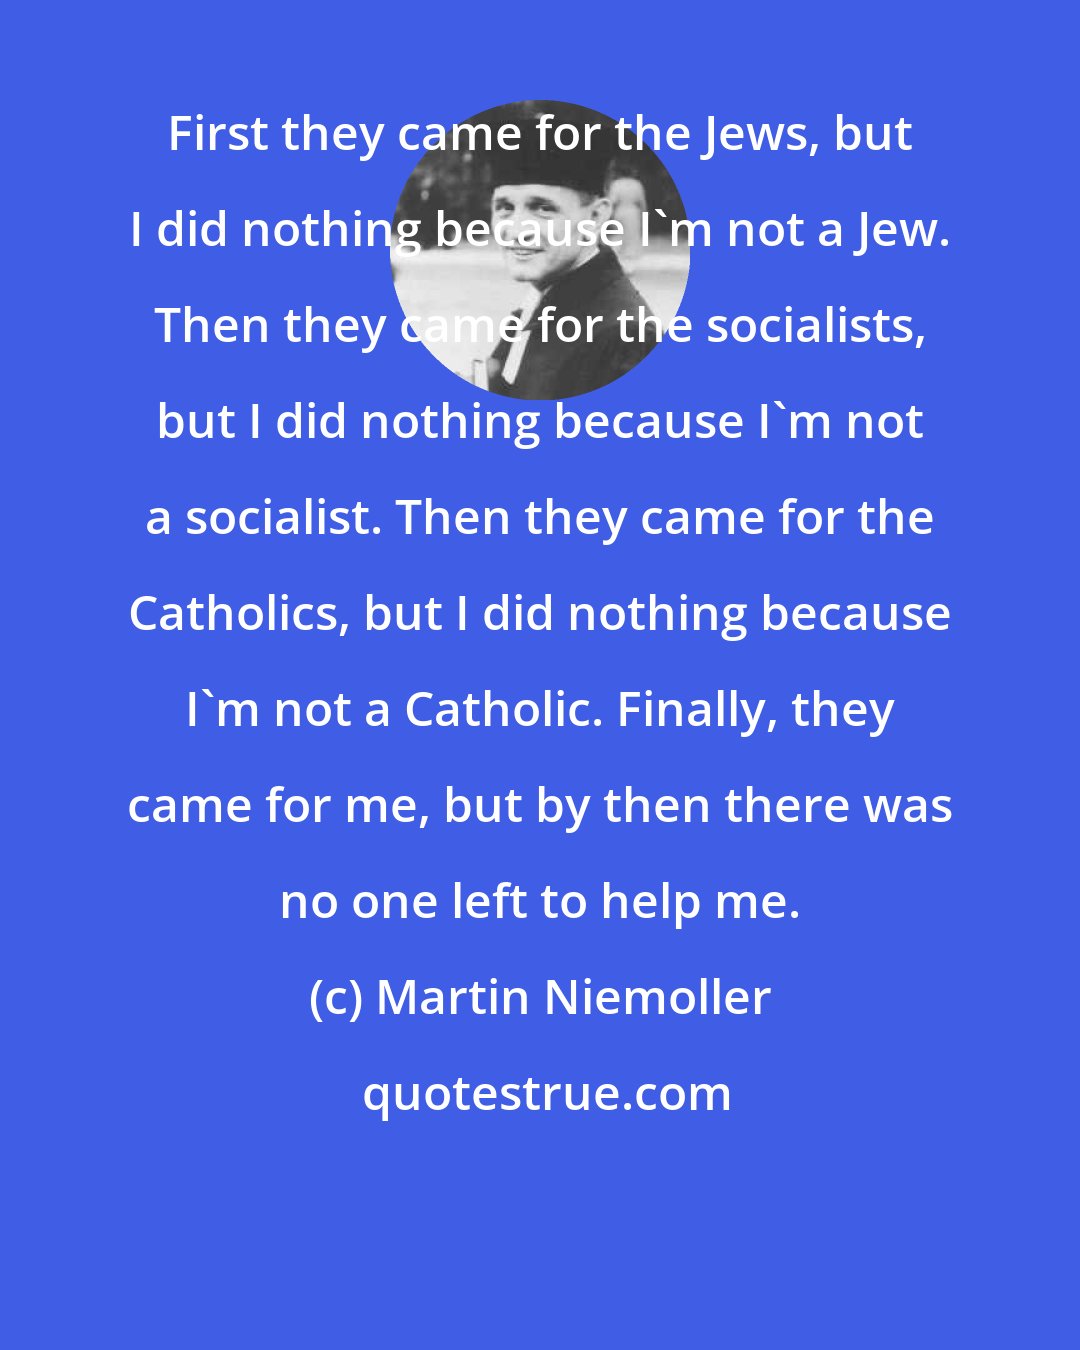 Martin Niemoller: First they came for the Jews, but I did nothing because I'm not a Jew. Then they came for the socialists, but I did nothing because I'm not a socialist. Then they came for the Catholics, but I did nothing because I'm not a Catholic. Finally, they came for me, but by then there was no one left to help me.